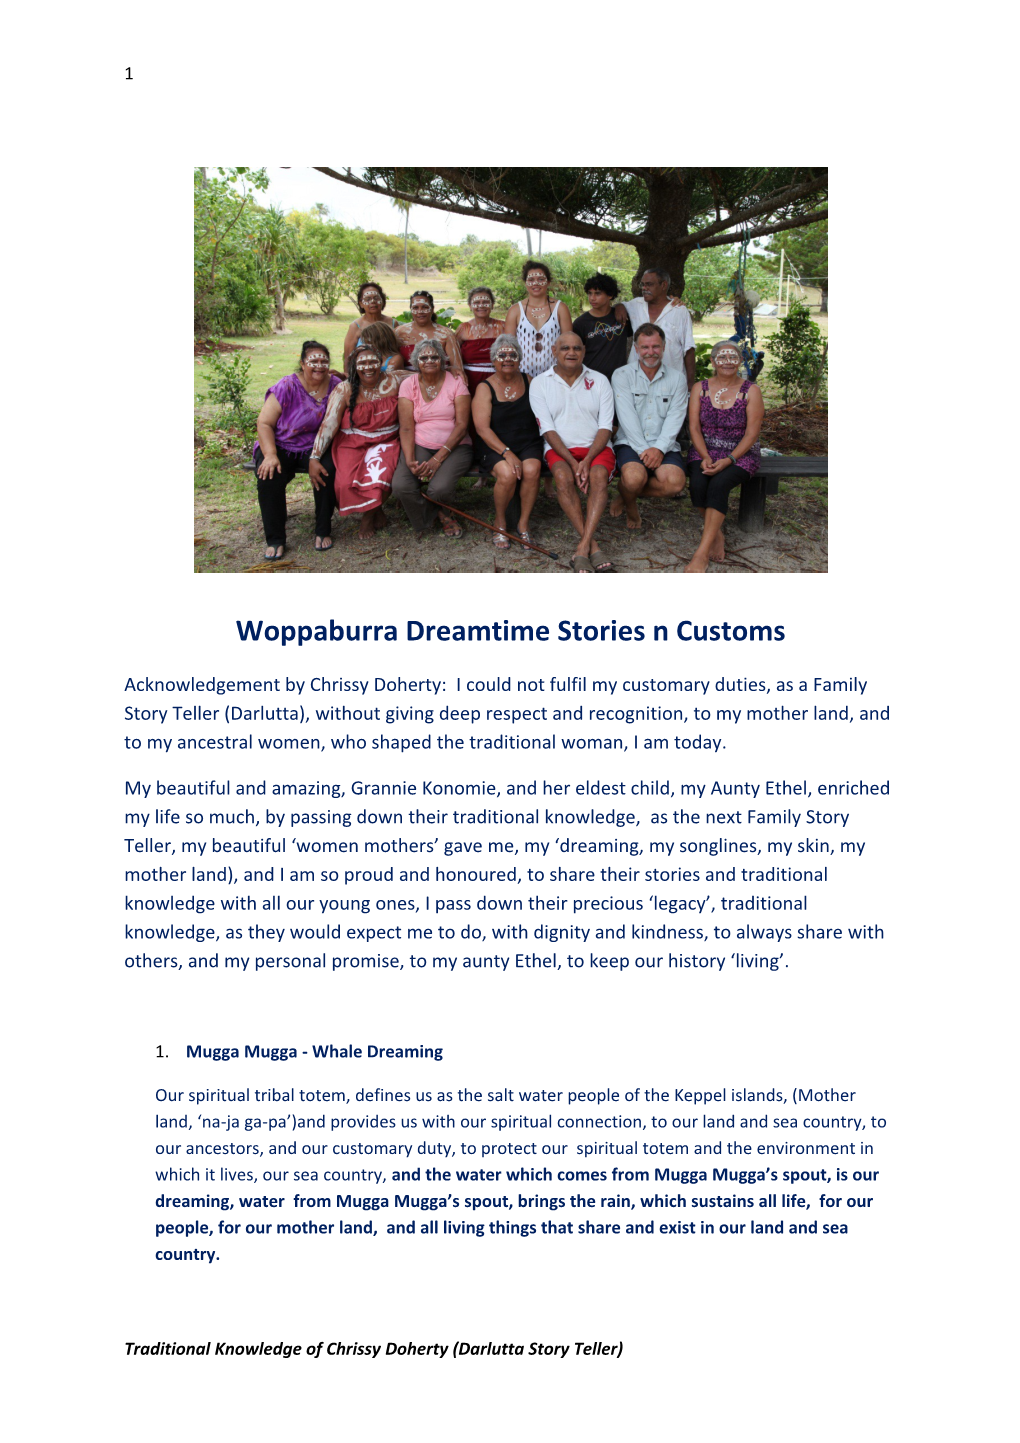 Woppaburra Dreamtime Stories and Customs